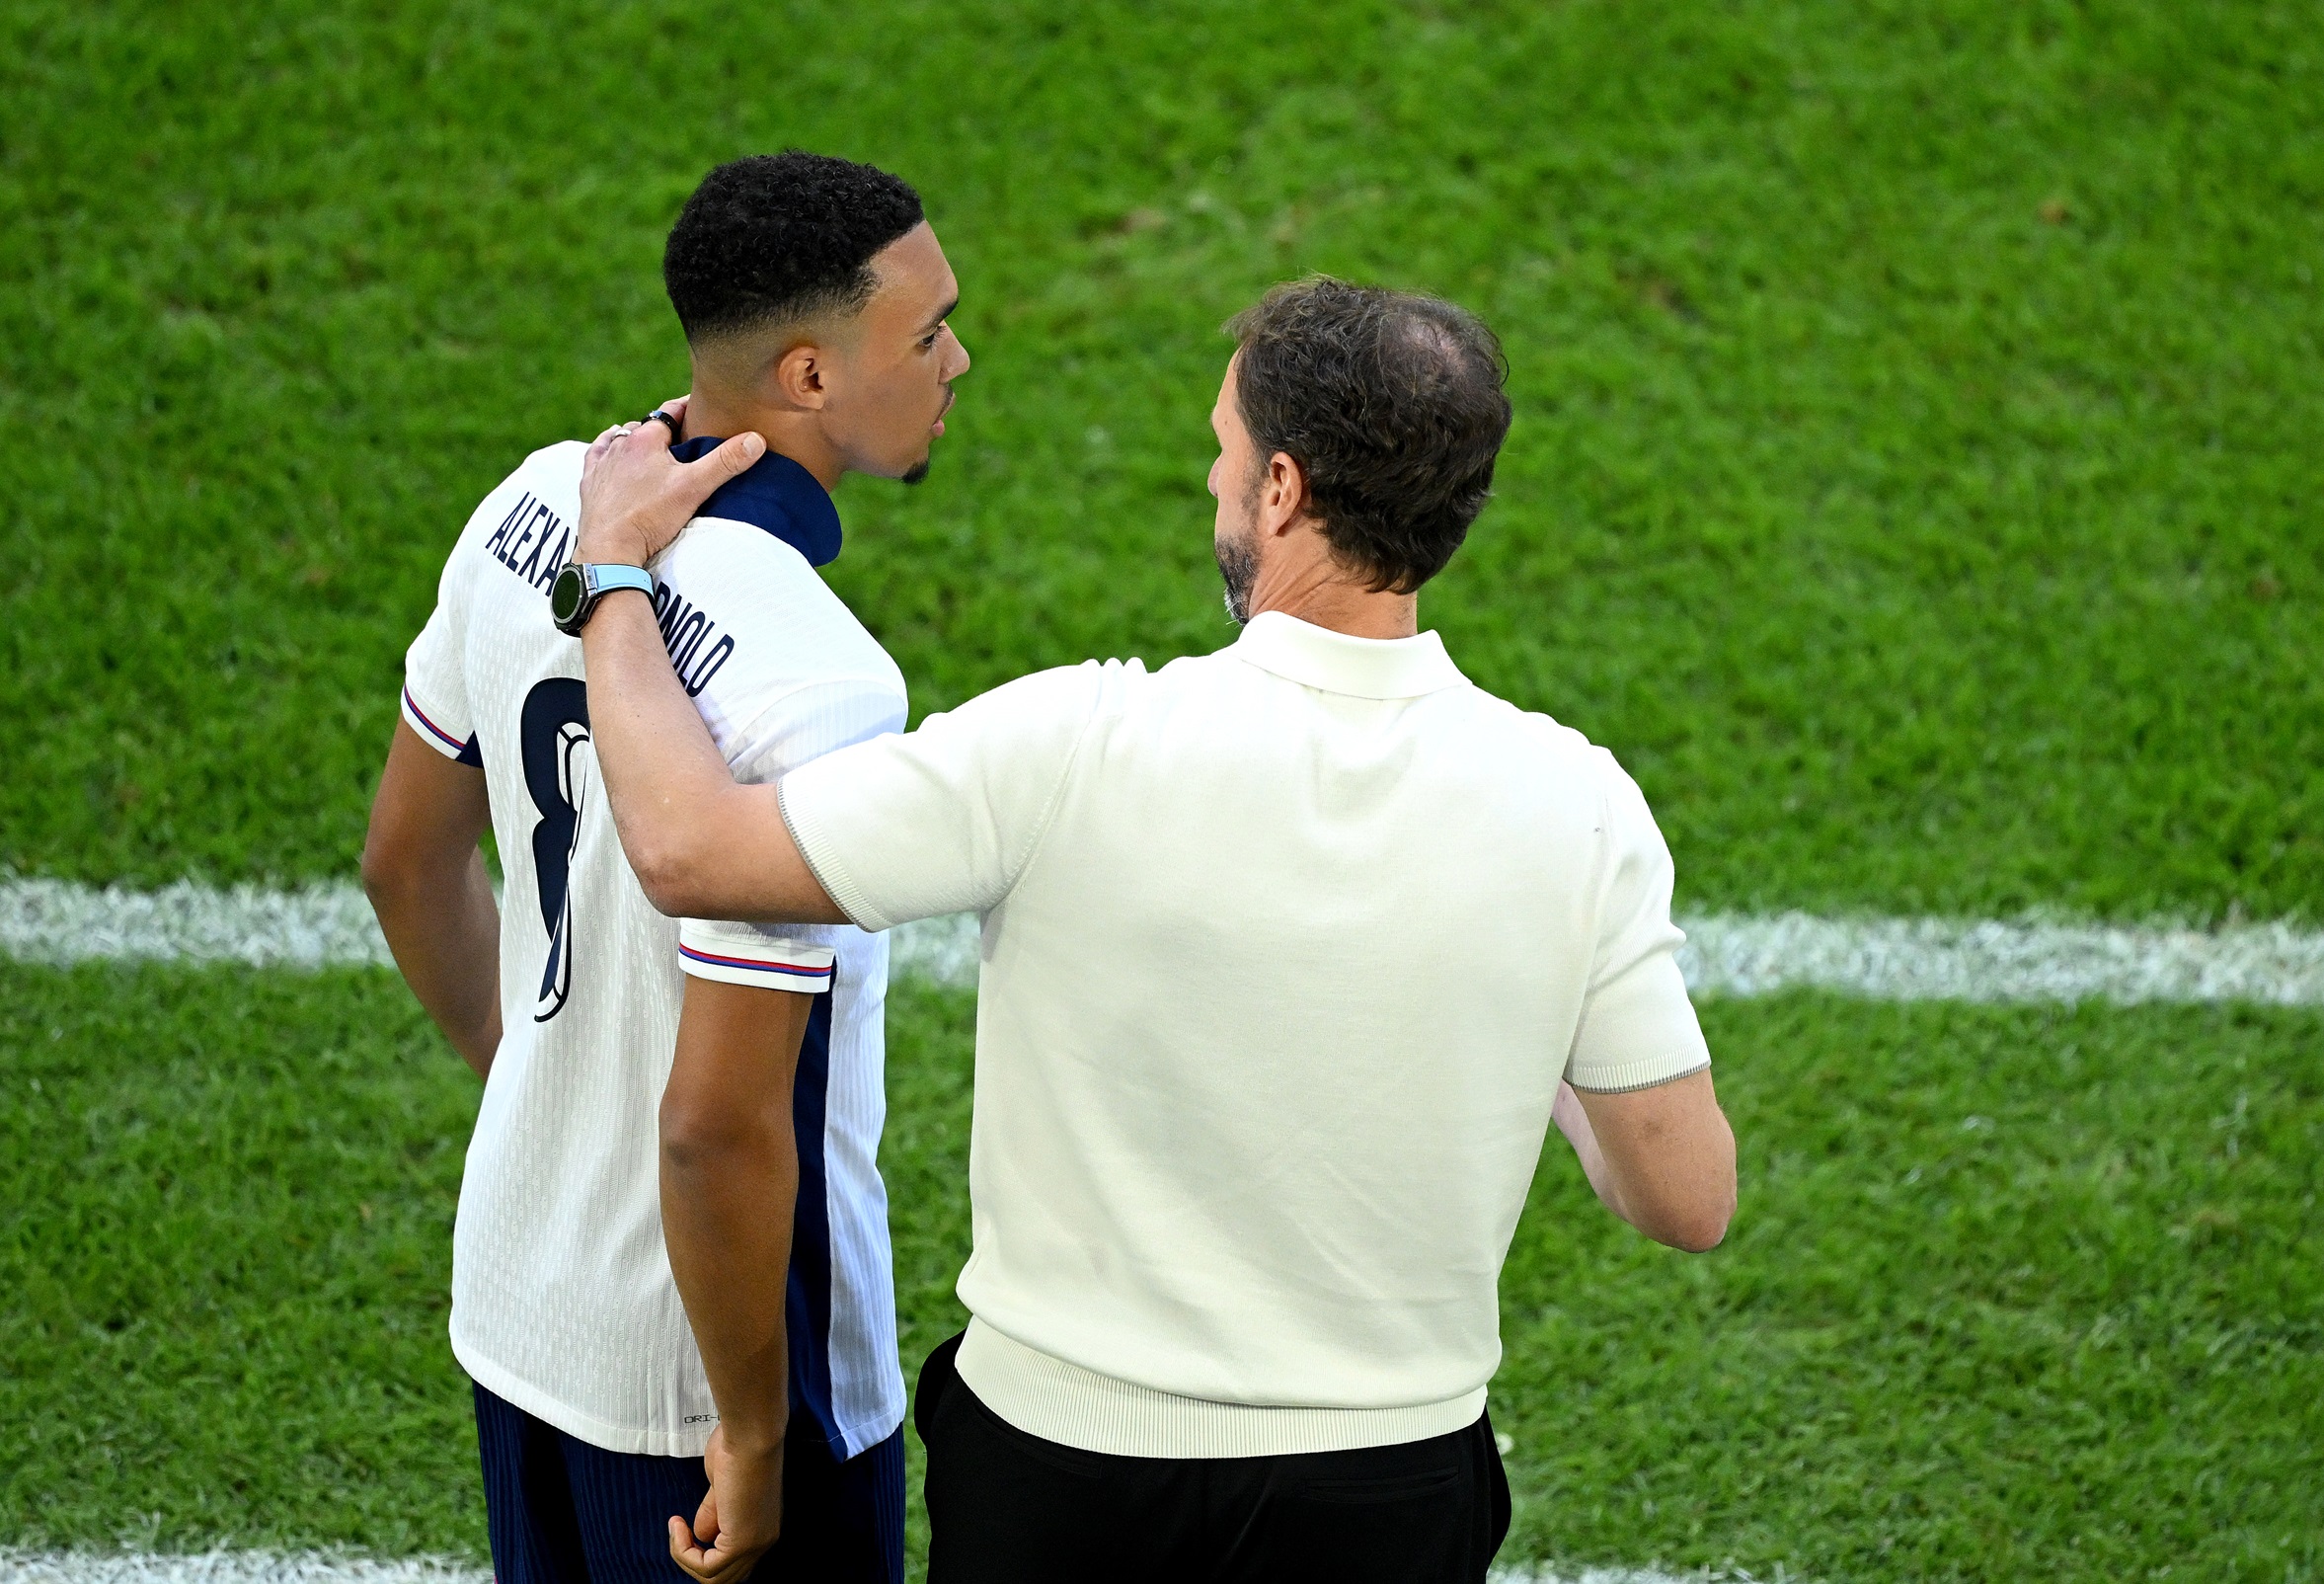 Southgate’s private chat with Trent Alexander-Arnold just added another item to Slot’s to-do list